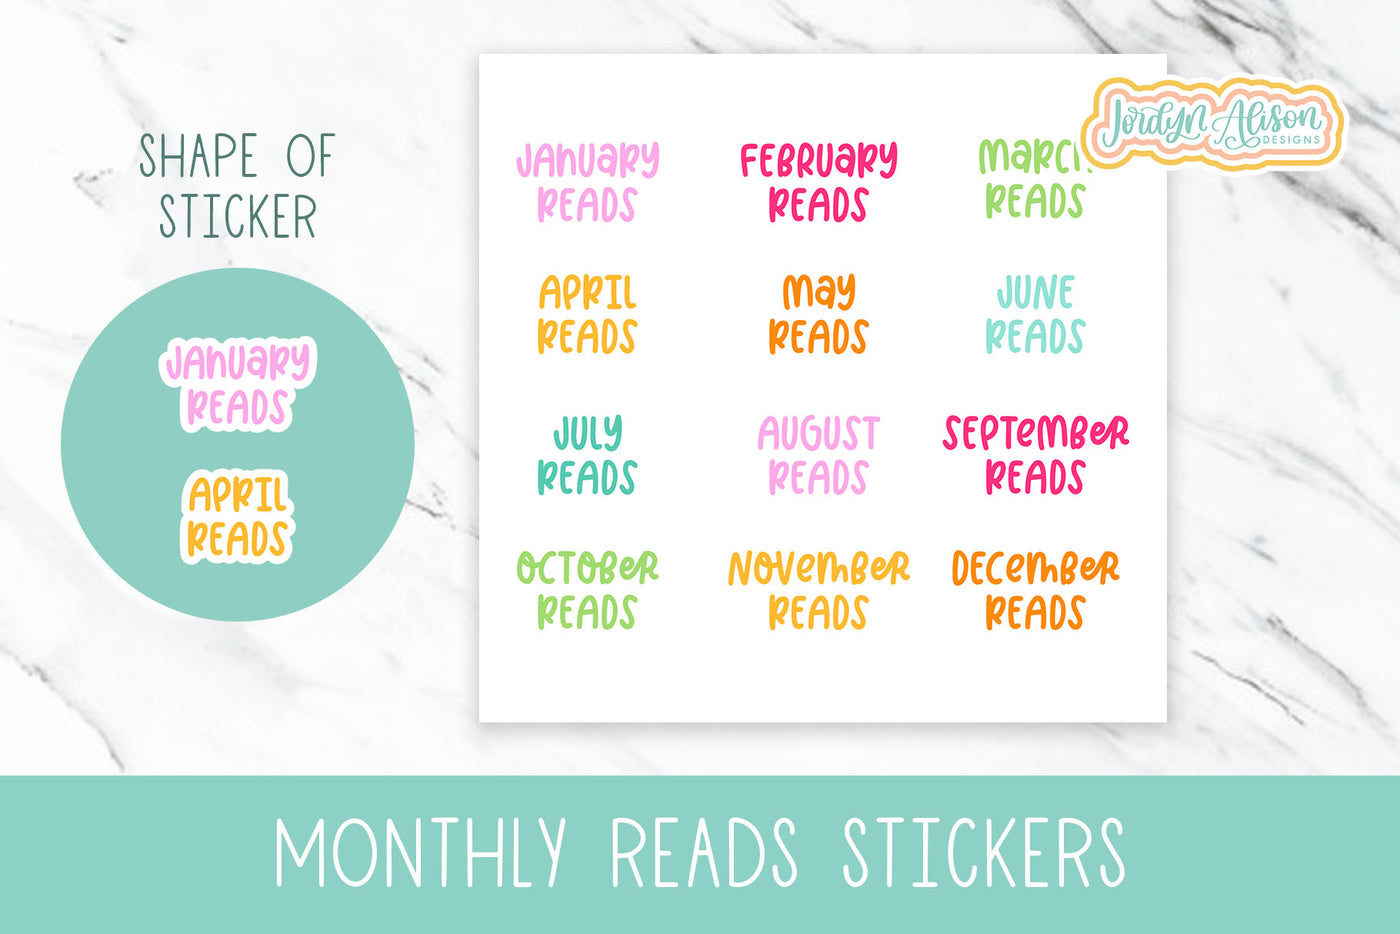 Monthly Reads Sticker for Reading Journal